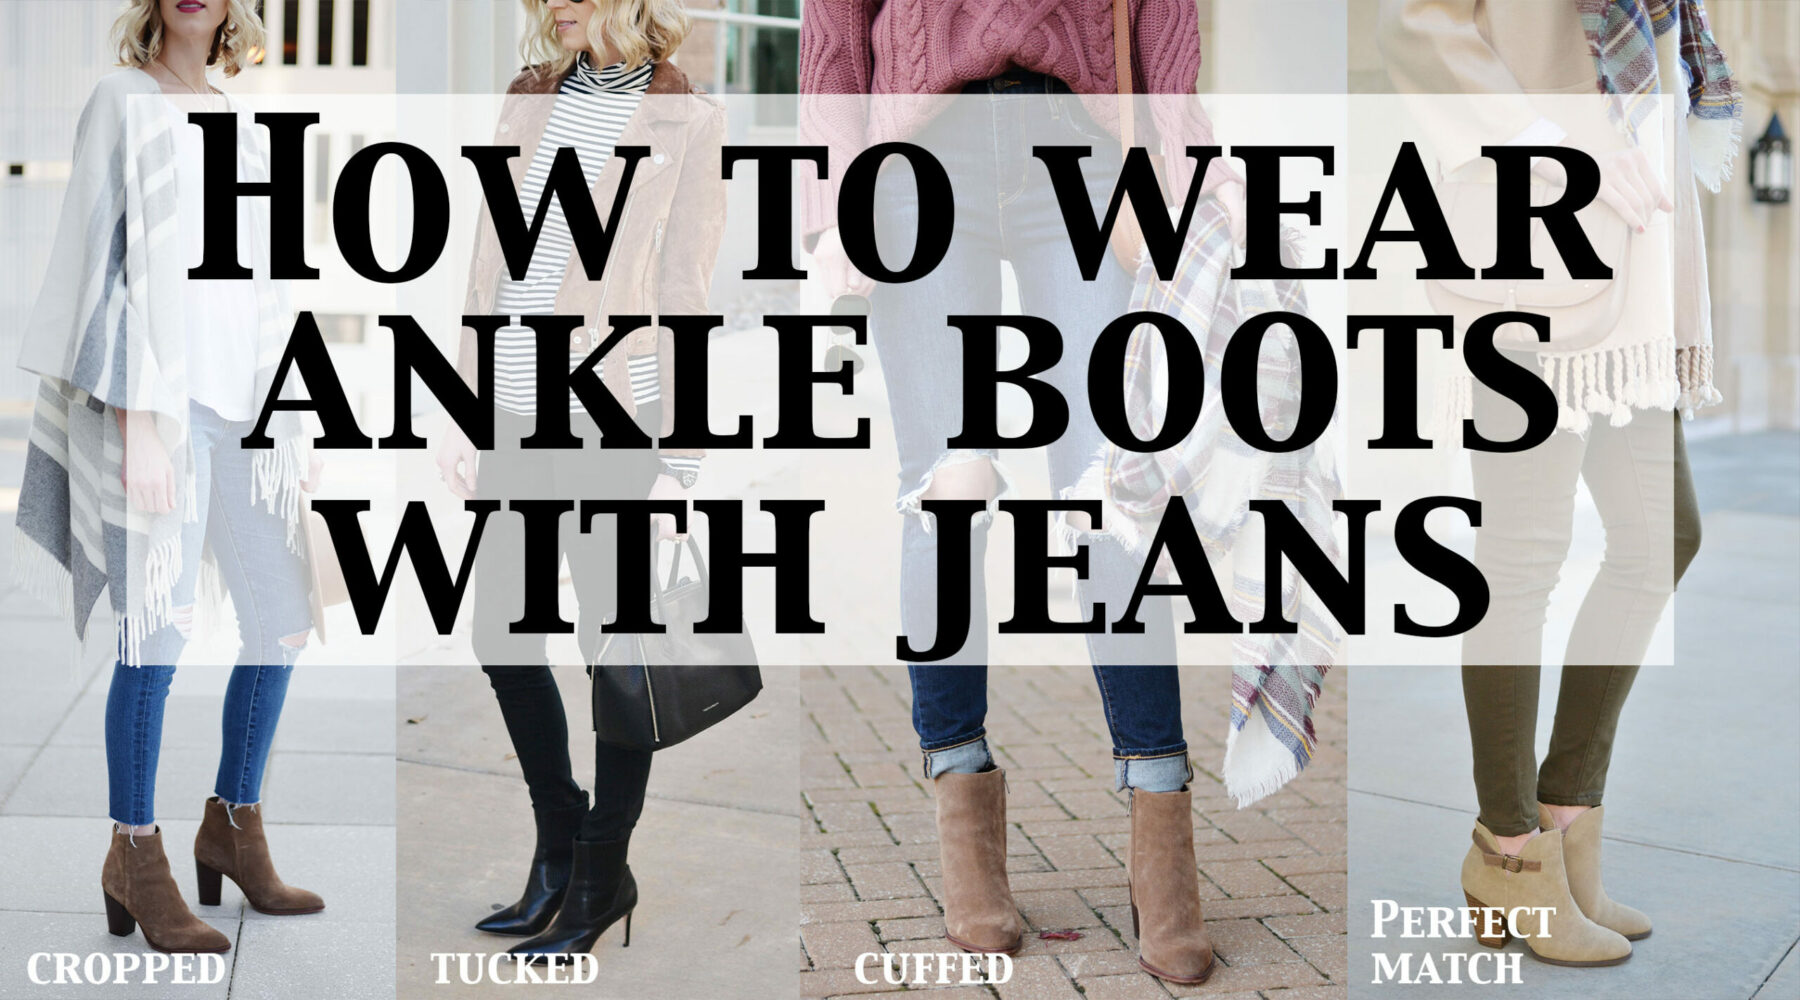 How to Wear Ankle Boots with Jeans - The Dos & Don'ts - Straight A